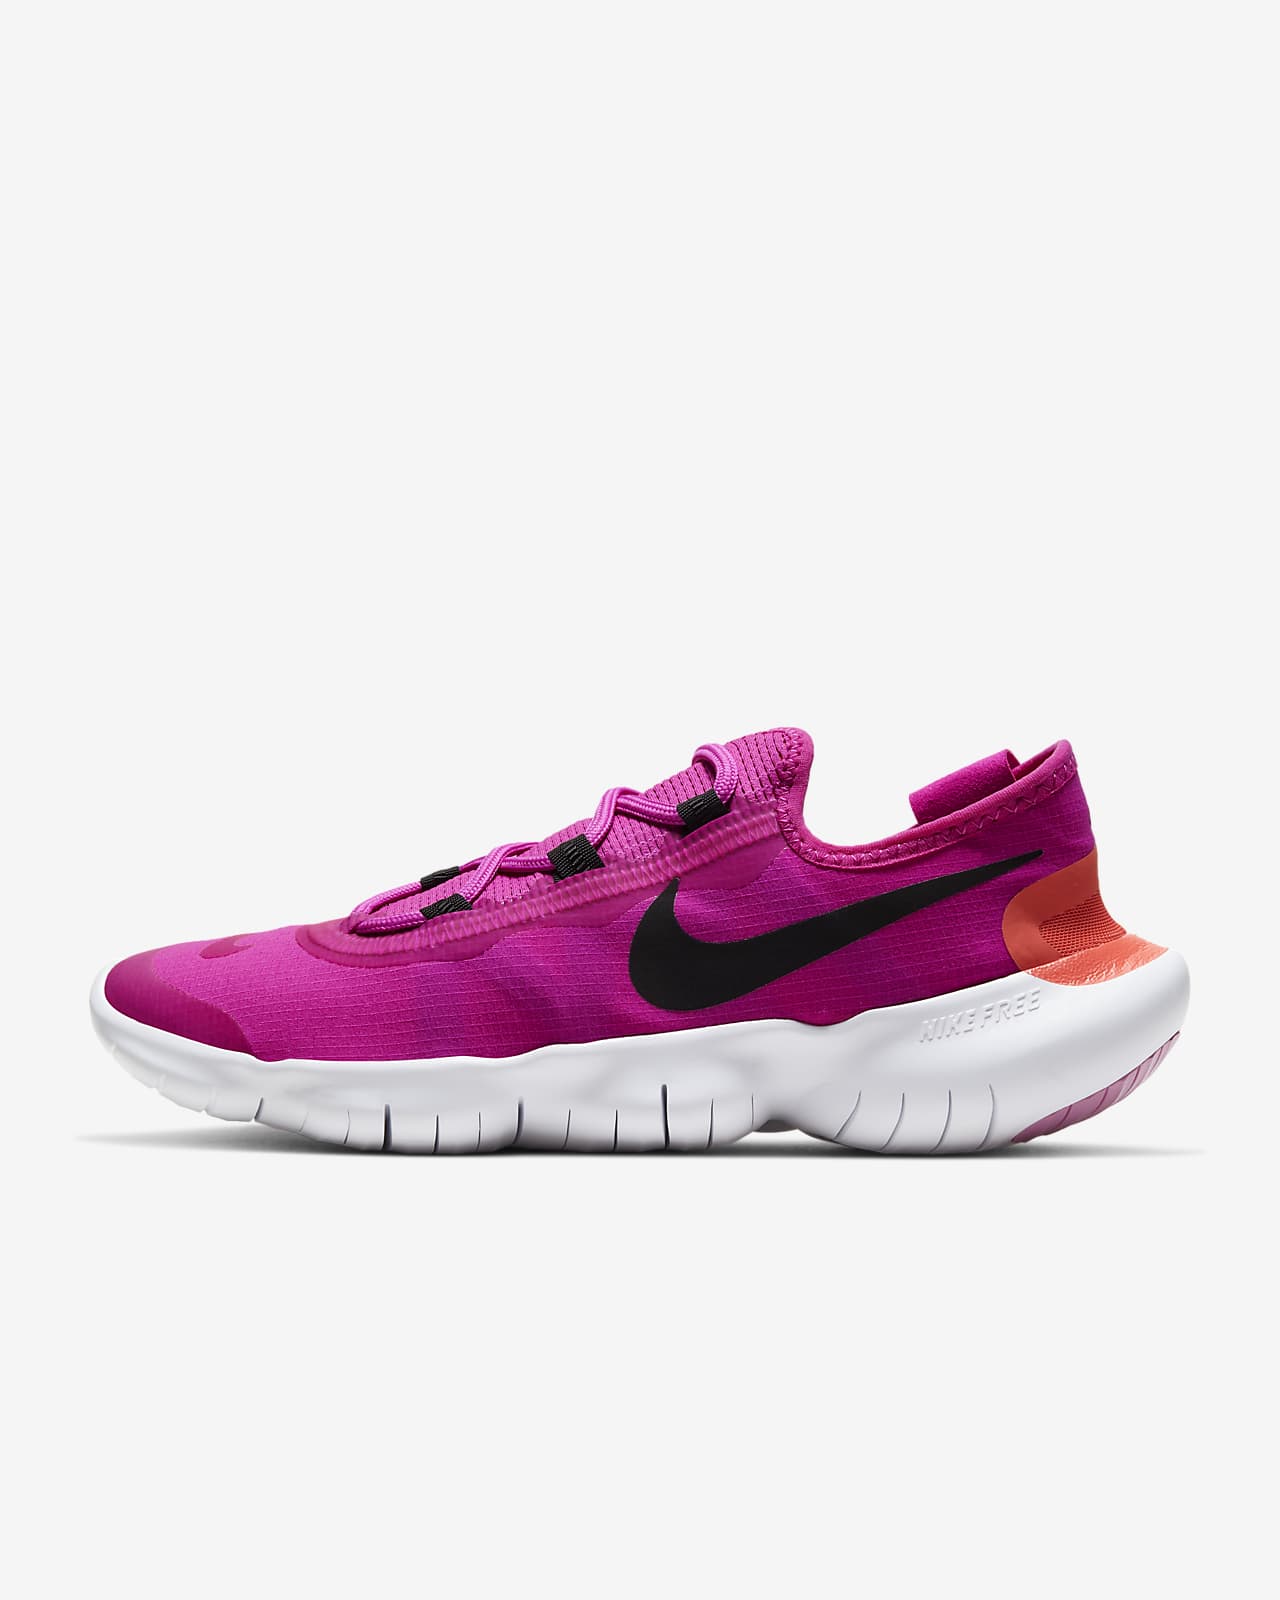 are nike free shoes good for running